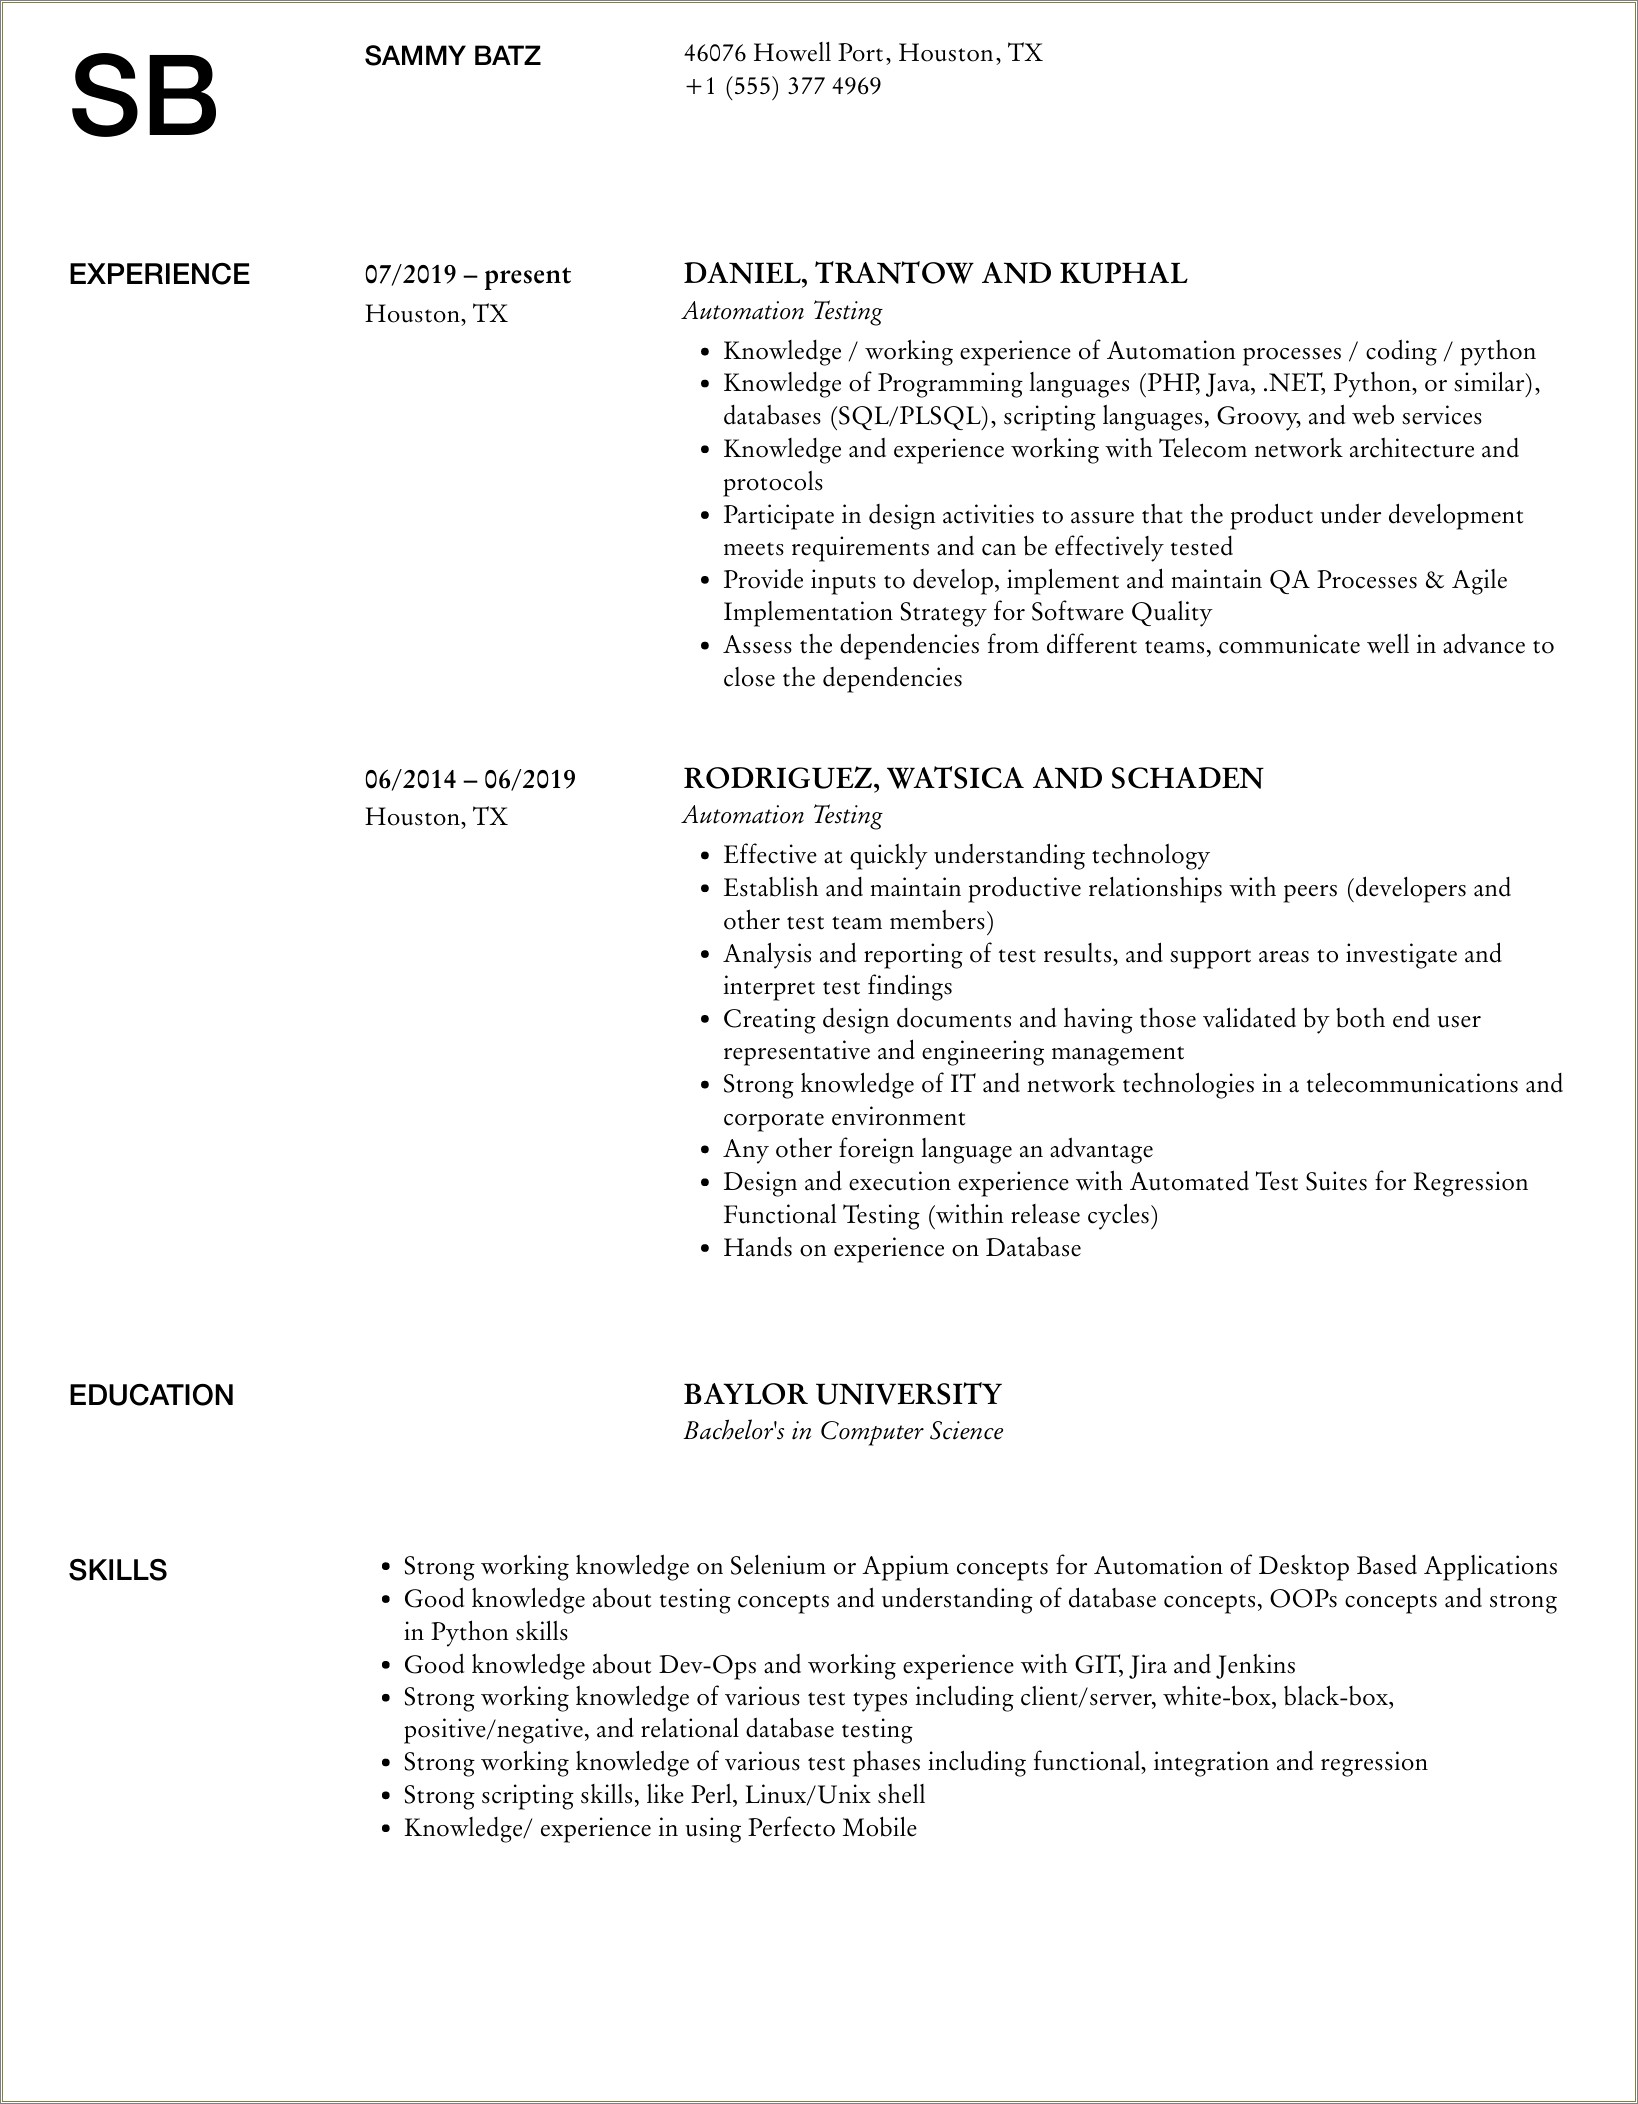 Automation Testing Renorex Resume For 6 Years Experience